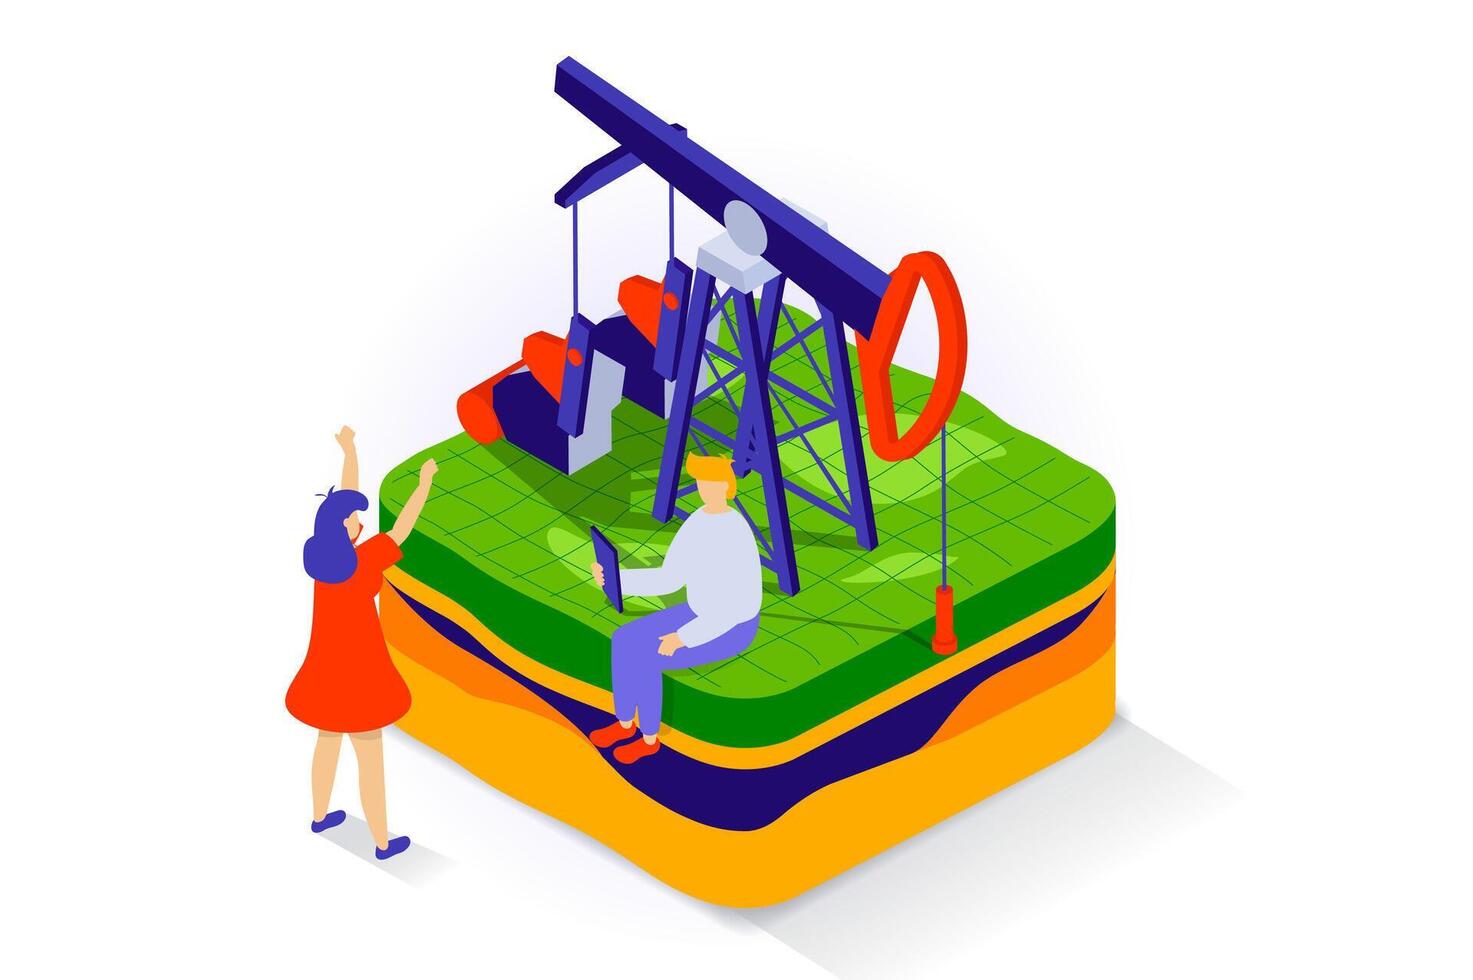 Oil industry concept in 3d isometric design. People work at petroleum factory by derrick and machinery for extraction crude energy resources. Vector illustration with isometry scene for web graphic